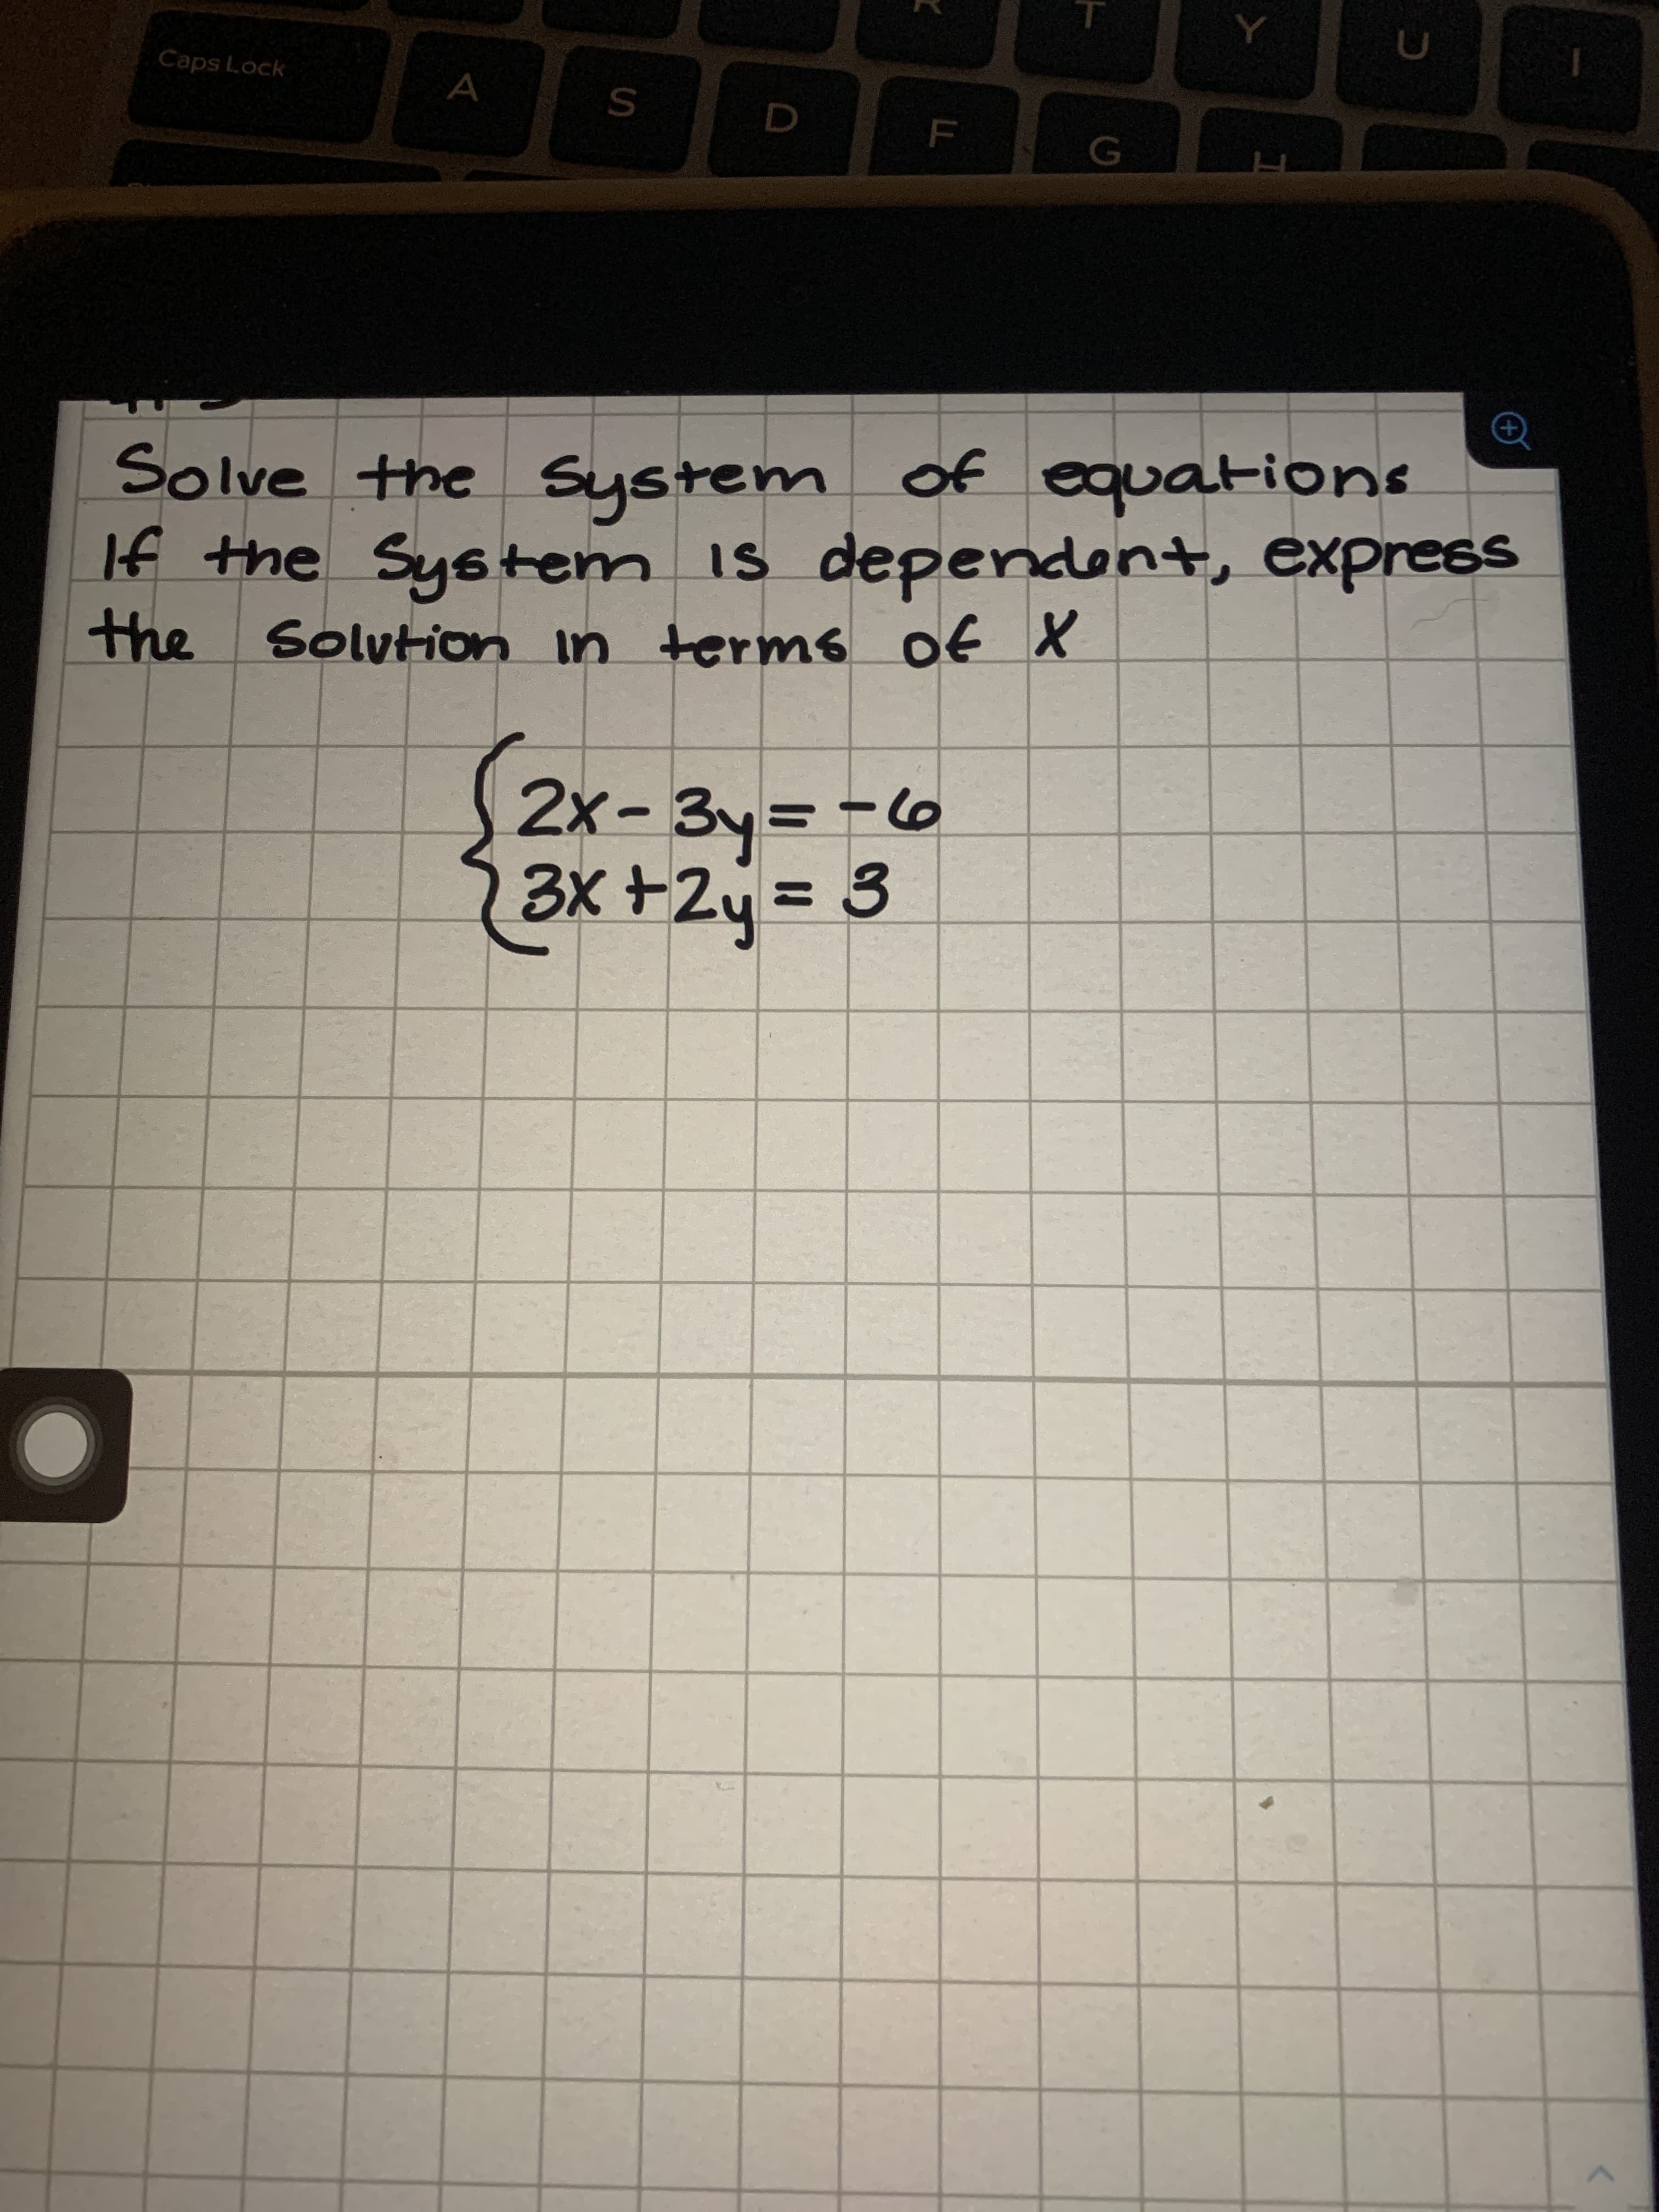 Solve the System of equations
If the System IS dependent, express
the Solvtion in terms of X
2x-3y=-6
3X +2y= 3
